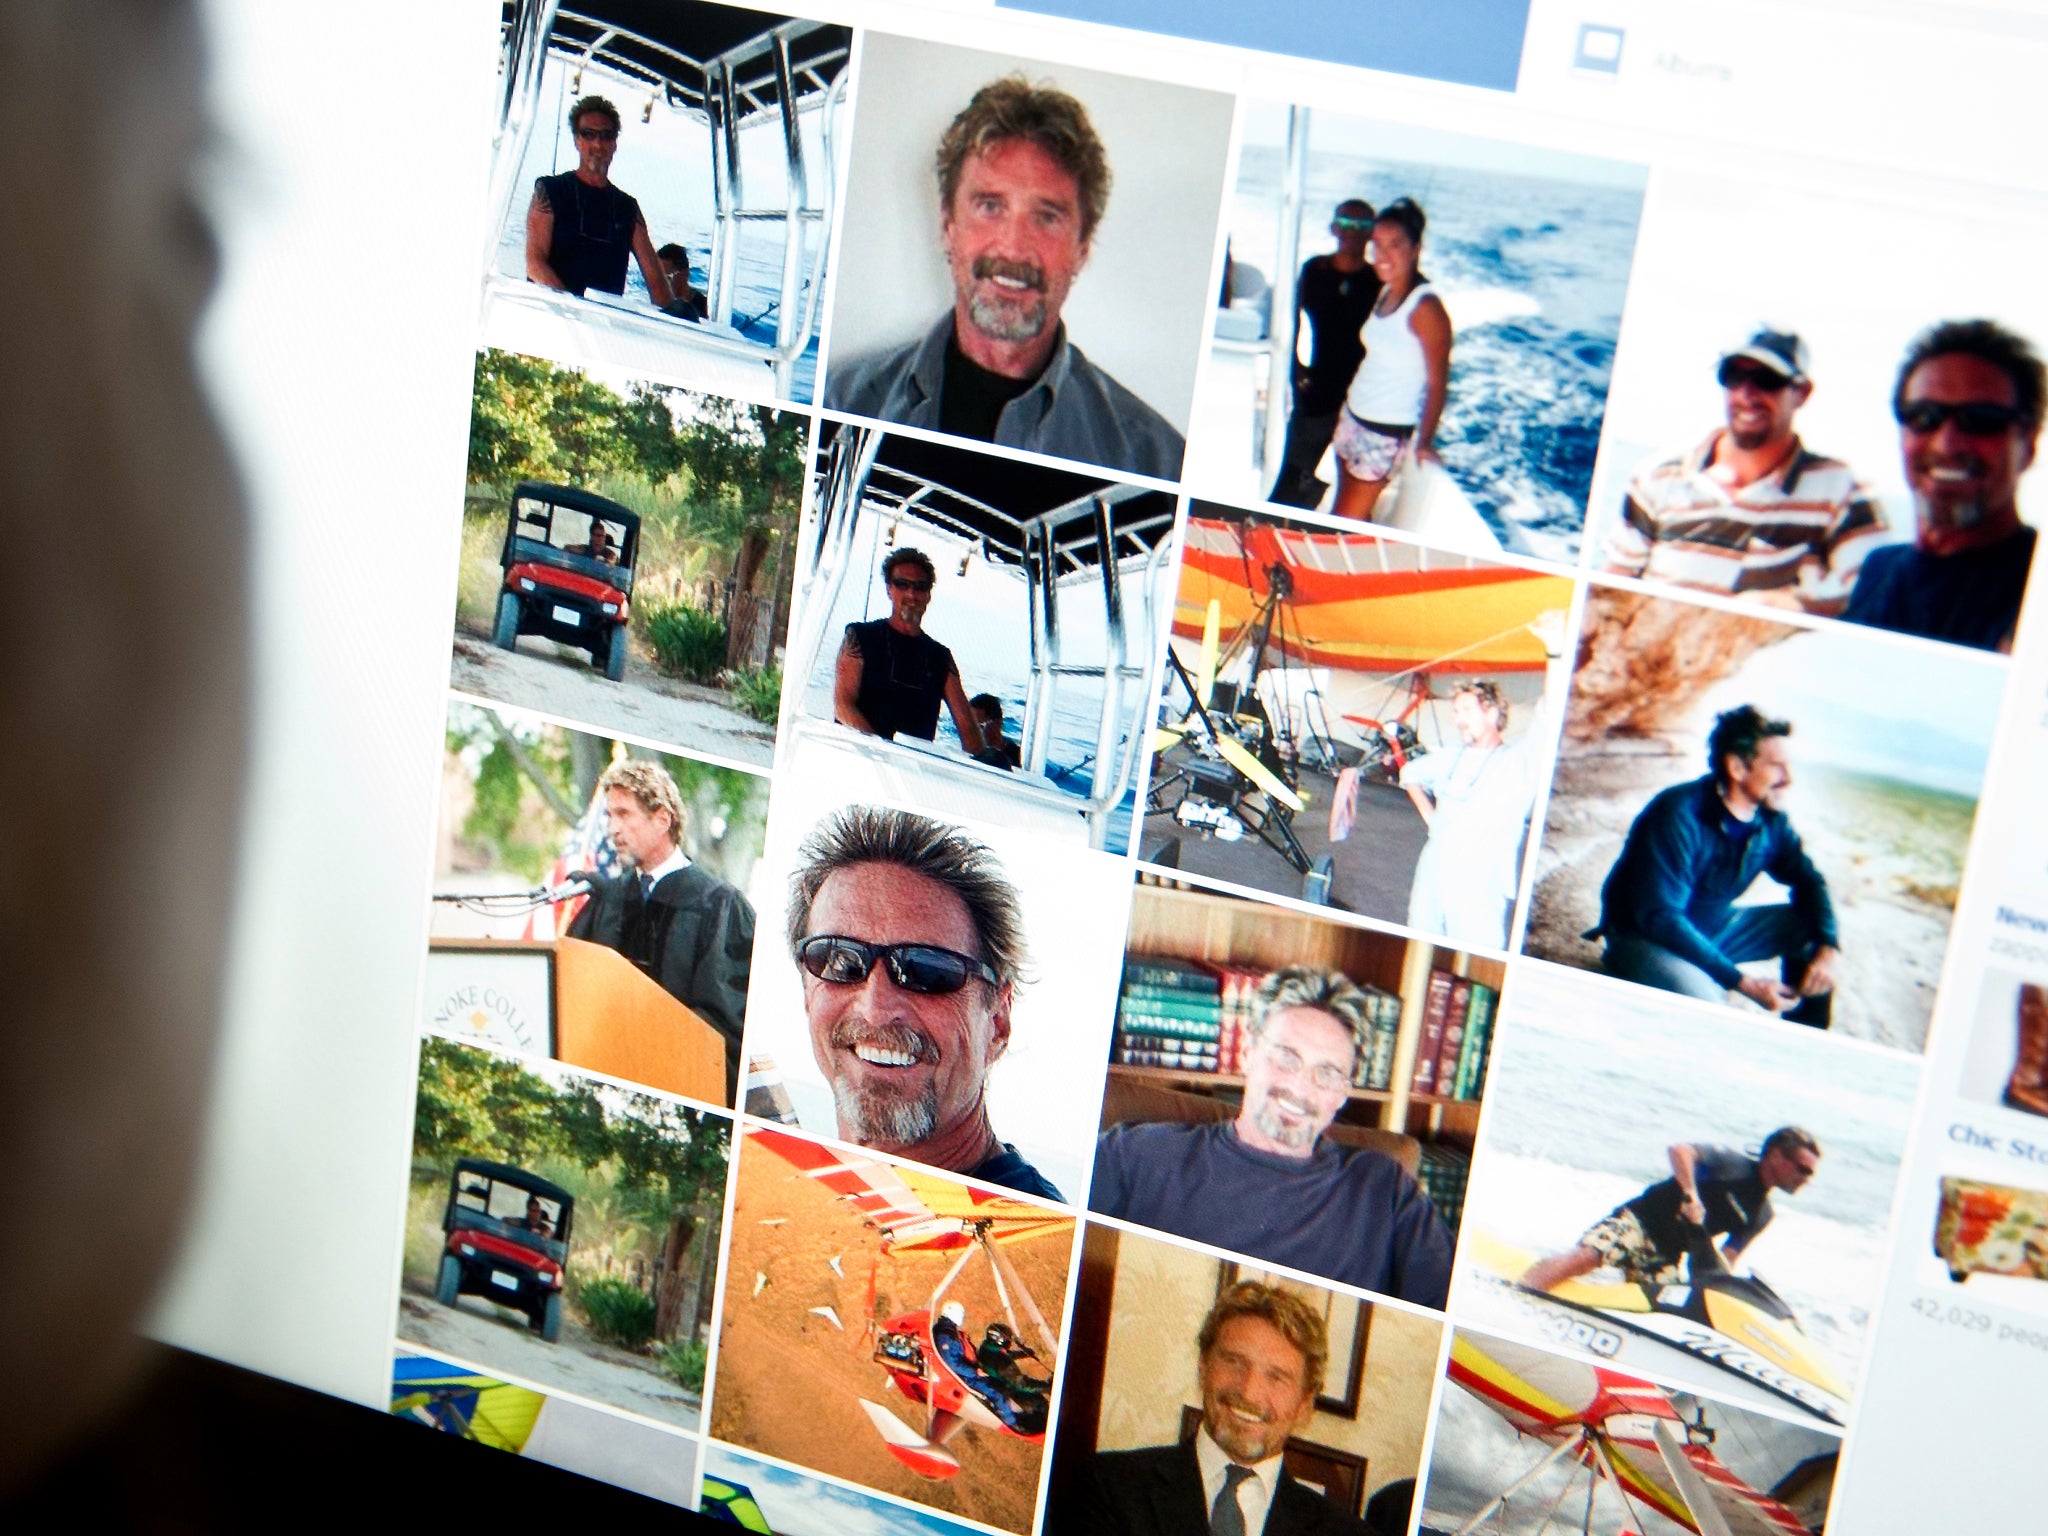 An internet users viewing a facebook page belonging to John McAfee